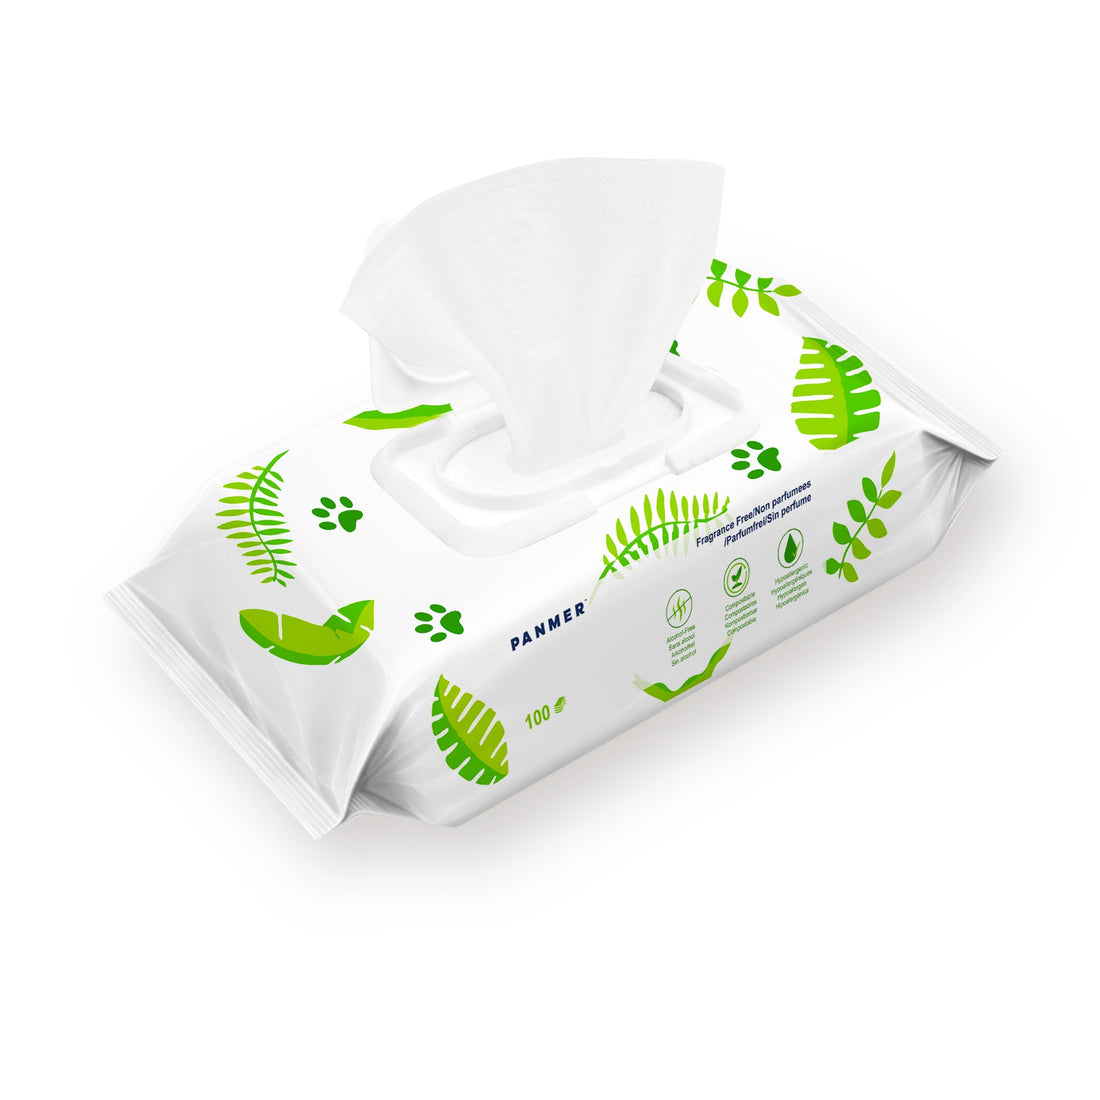 Why use compostable pet wipes?